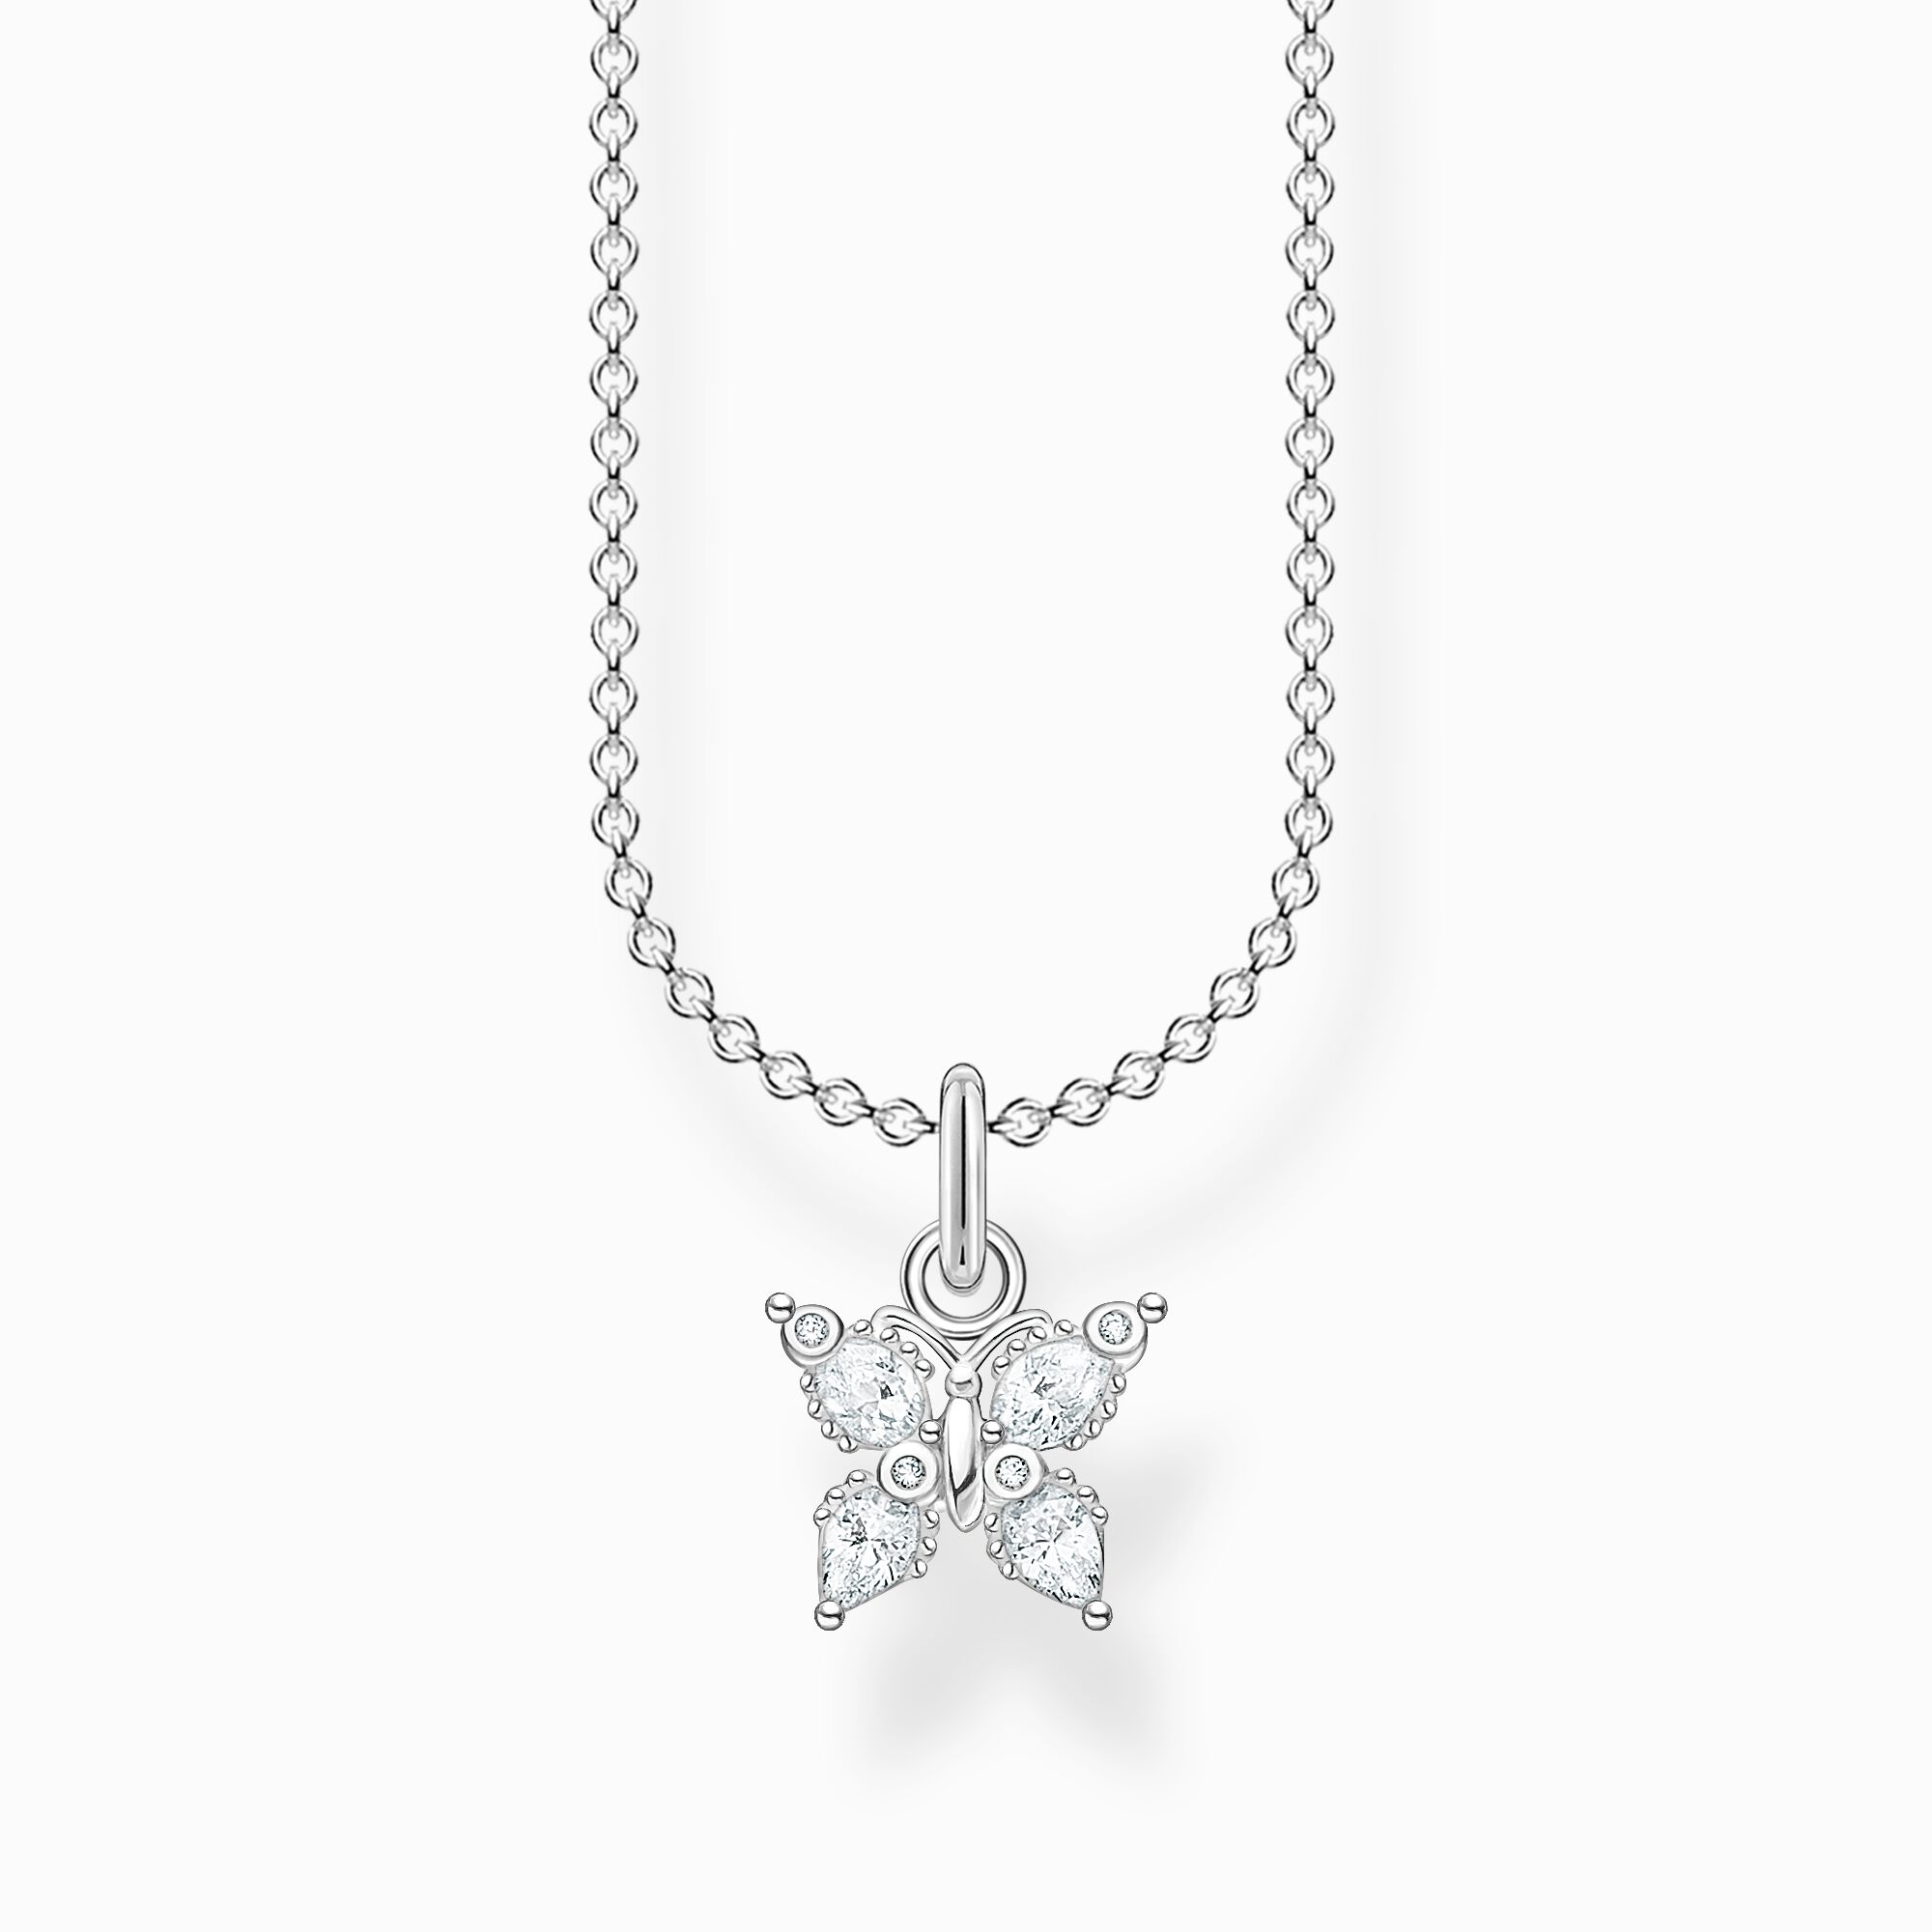 Necklace butterfly white stones from the Charming Collection collection in the THOMAS SABO online store